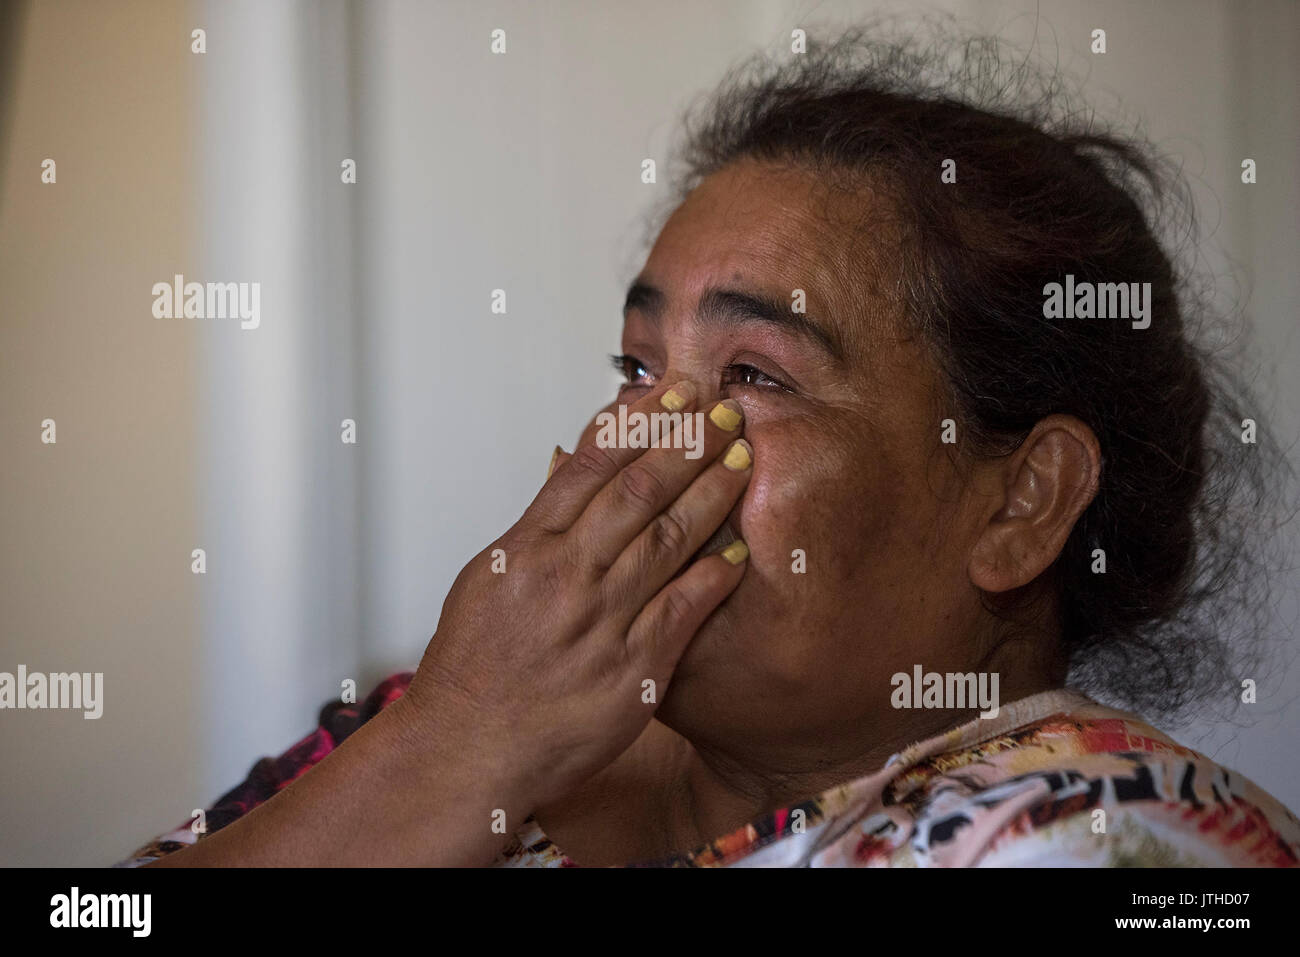 West Palm Beach, Florida, USA. 9th Aug, 2017. Amanda Cruz, mother of 22-year-old murder victim Juan Cruz, wipes tears from her eyes as she speaks at her home in Boynton Beach, Fla., on Wednesday, August 9, 2017. Cruz's son was killed August 6 defending his cousin, Pedro Cruz, not pictured, during an altercation outside a Lake Worth restaurant. Credit: Andres Leiva/The Palm Beach Post/ZUMA Wire/Alamy Live News Stock Photo